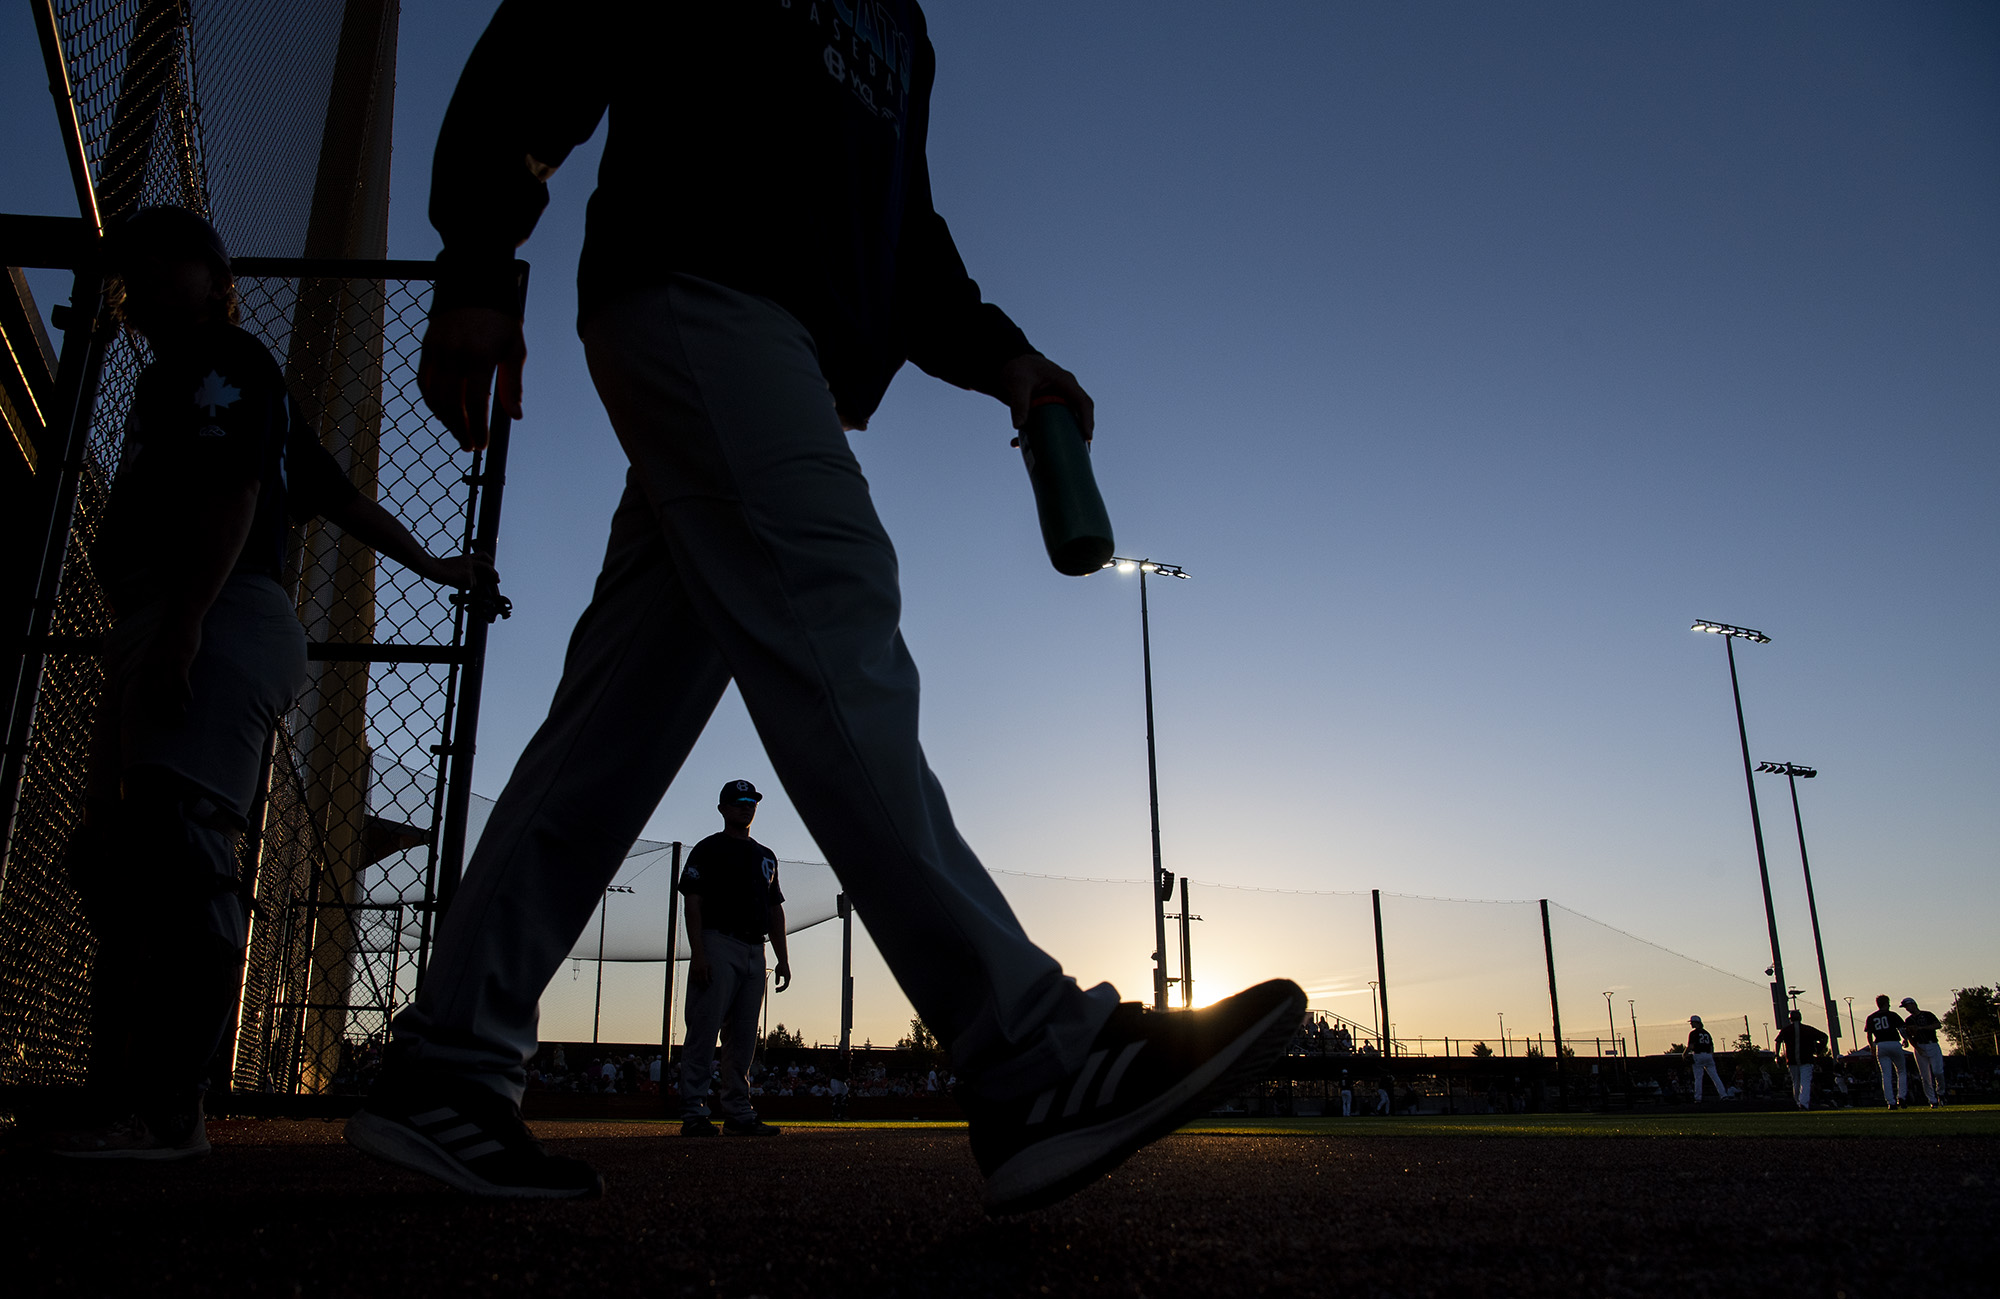 Victoria HarbourCats players walk out of the dugout during sunset Friday, June 24, 2022, during a game between the Ridgefield Raptors and the Victoria HarbourCats at the Ridgefield Outdoor Recreation Complex.